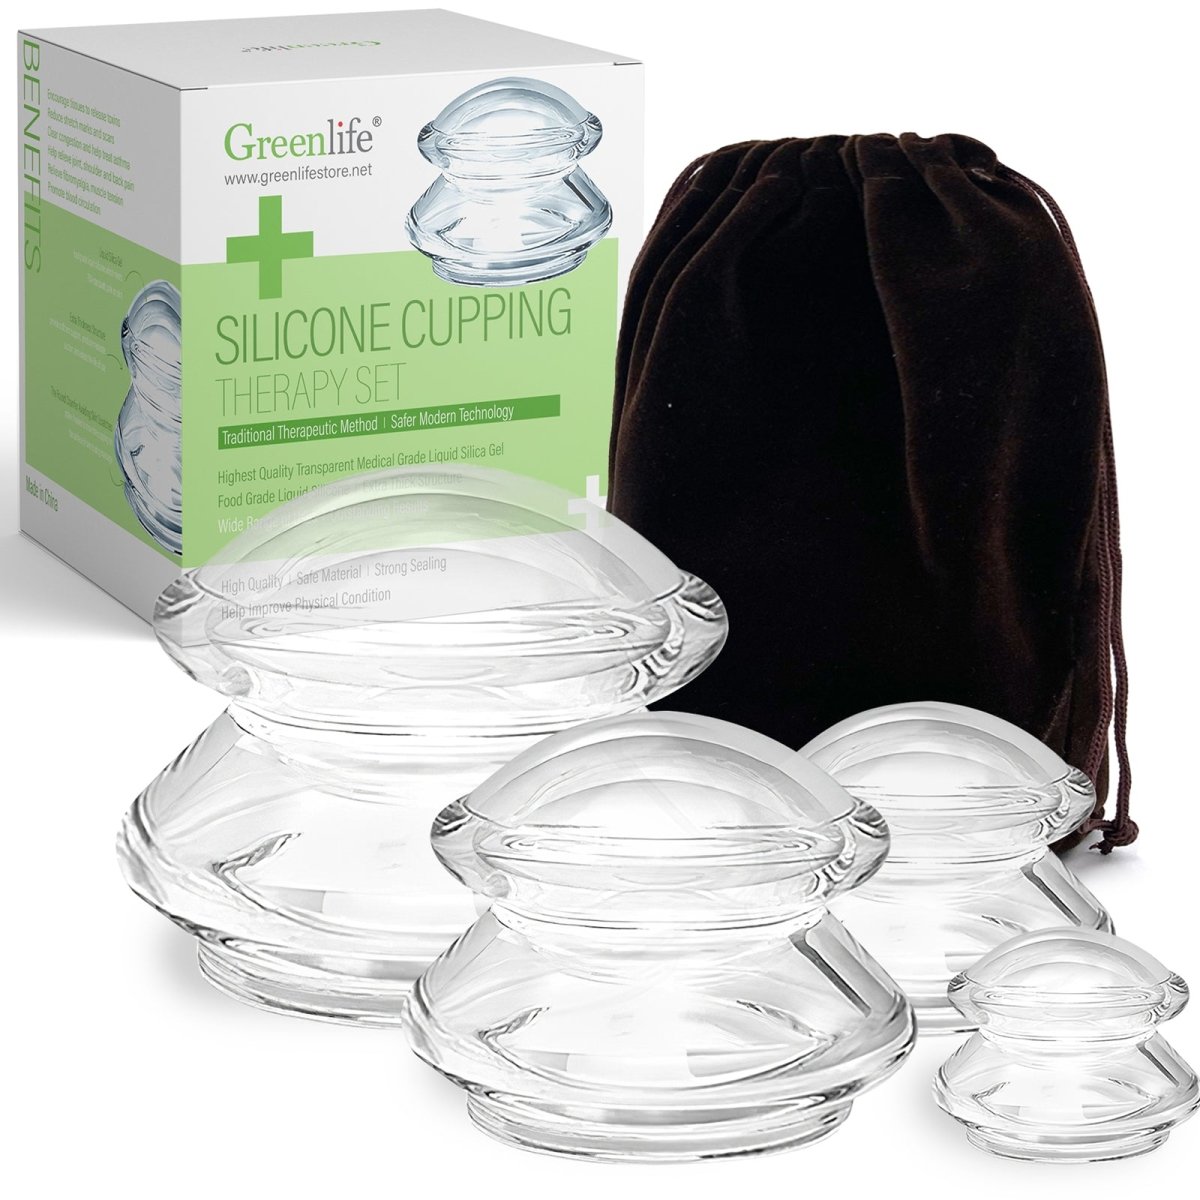 Silicone Cupping Device - GreenLife-Massage Supplies